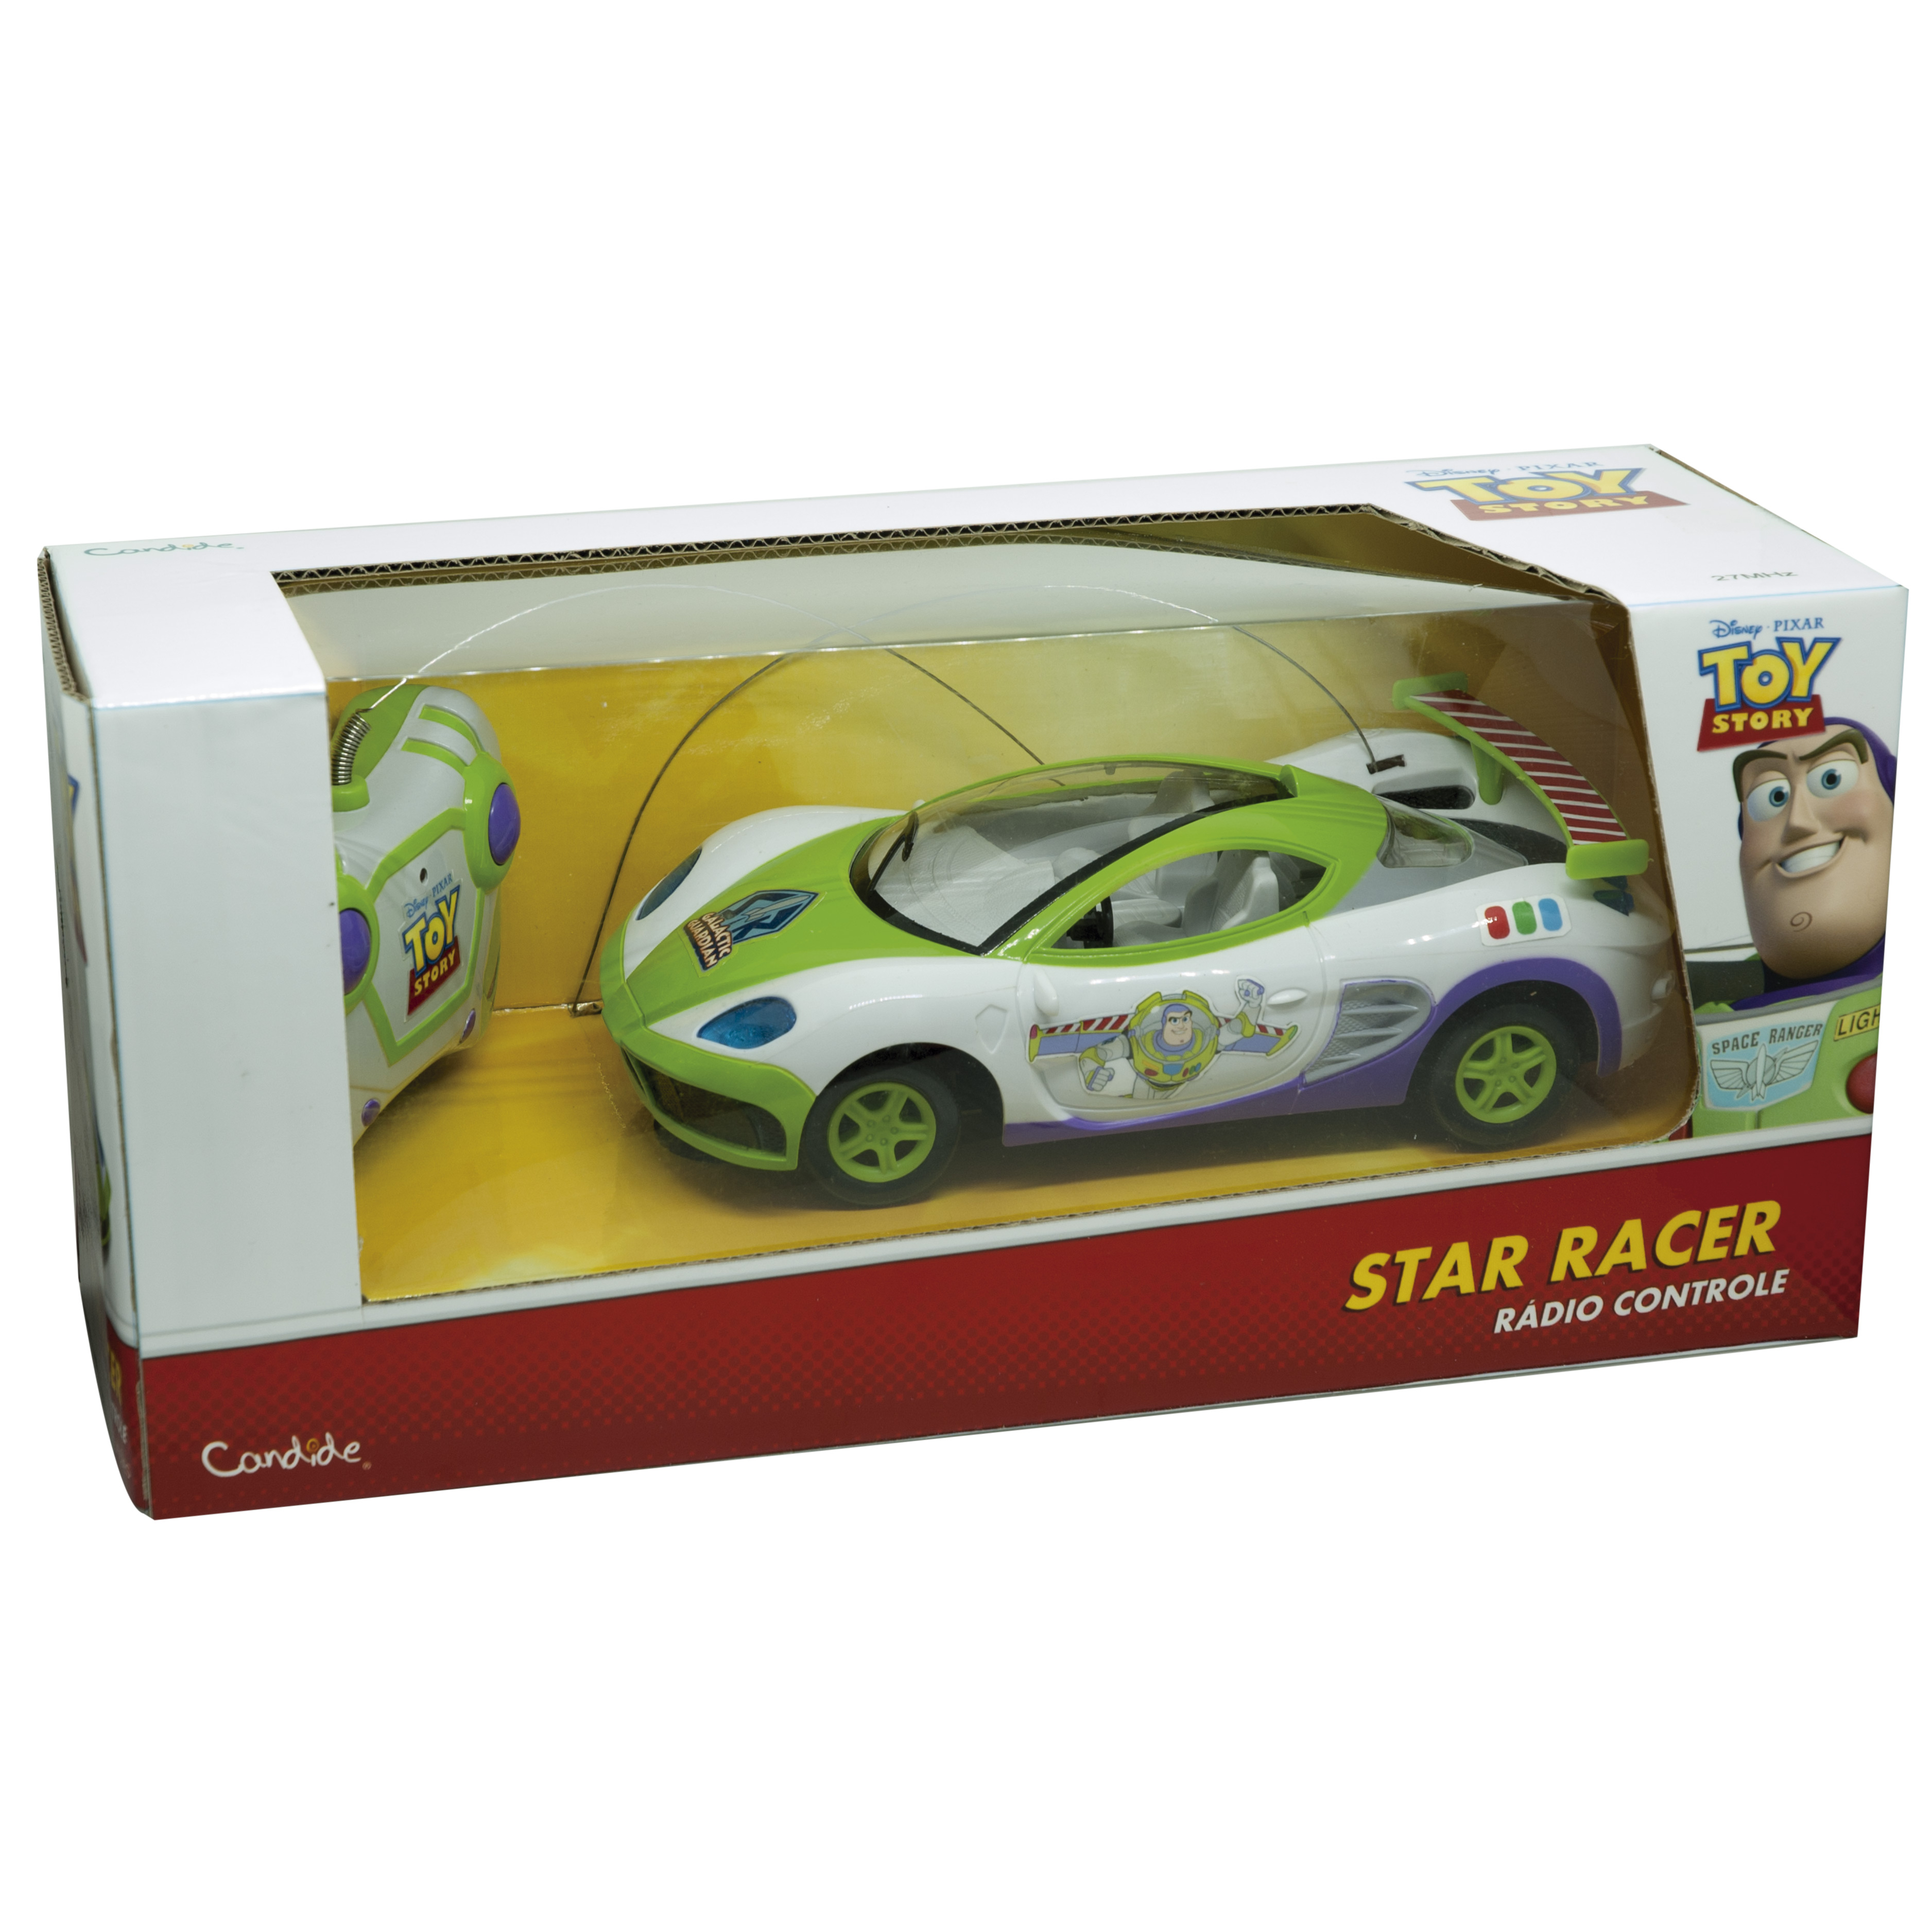 7897500549428 - VEICULO STAR RACER TOY STORY RC 3 FU REF 4942 CANDIDE